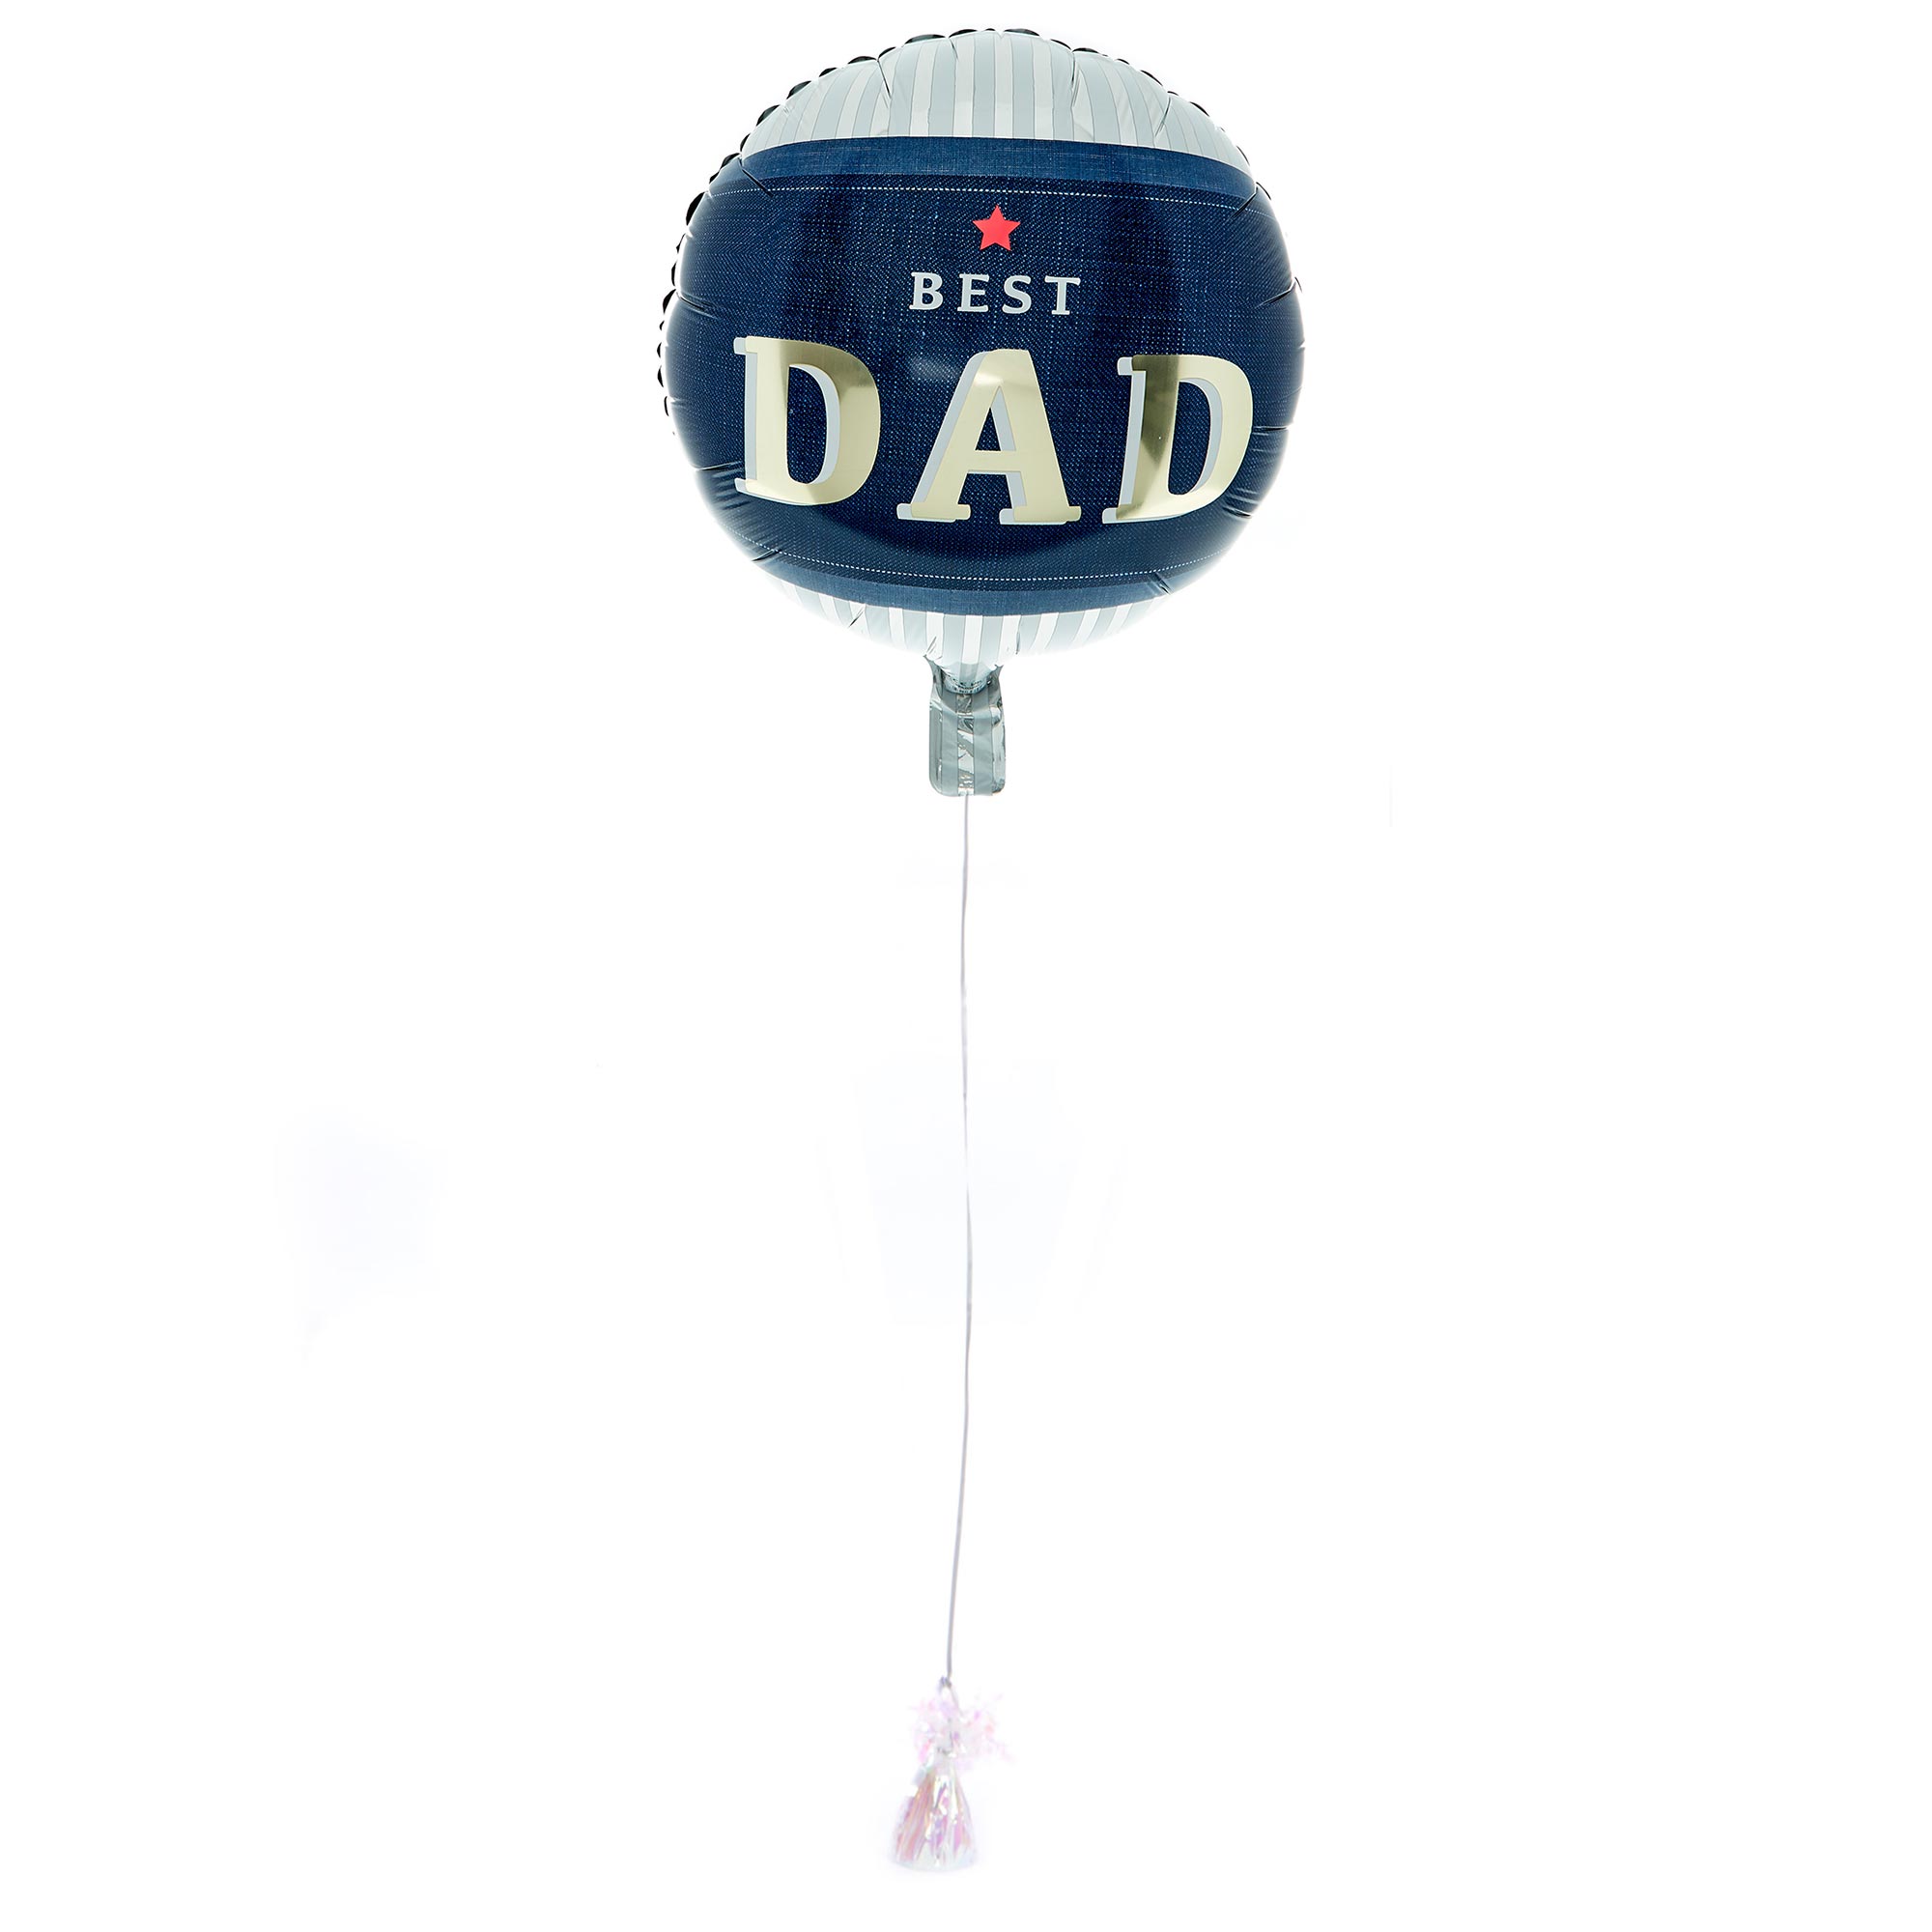 Best Dad Balloon & Lindt Chocolate Bar - FREE GIFT CARD!